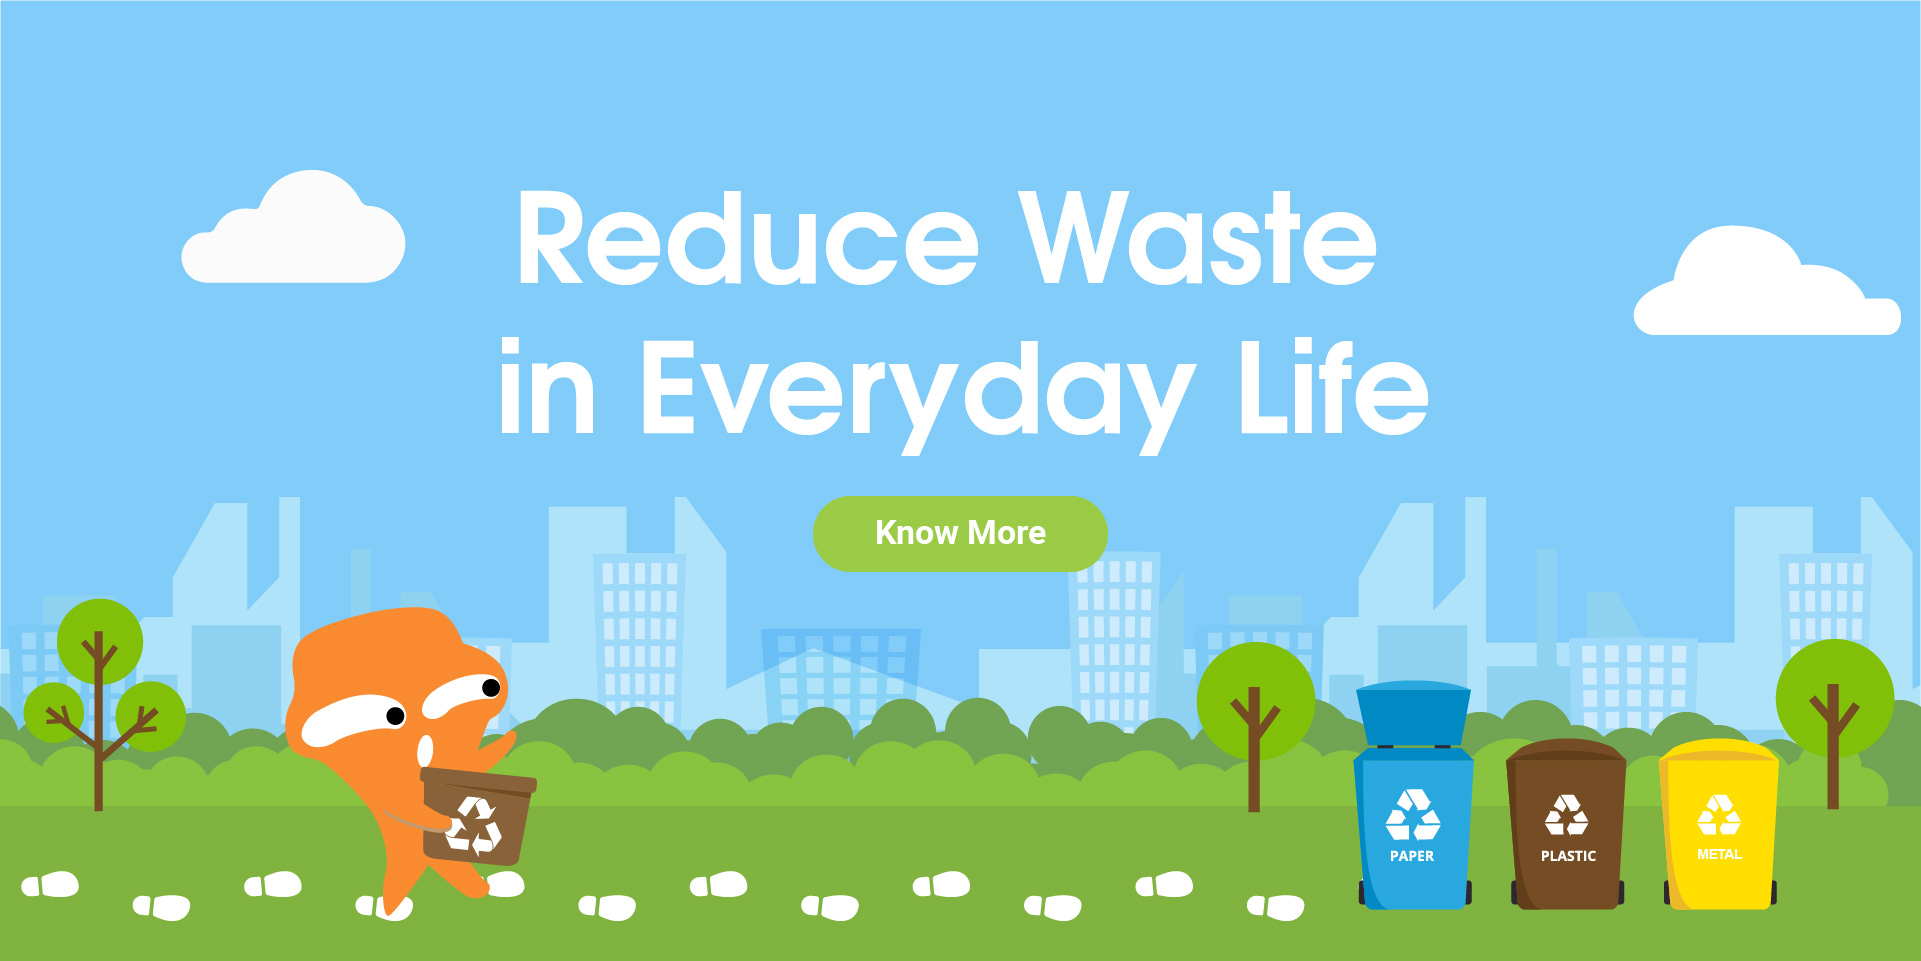 Reduce Waste in Everyday Life